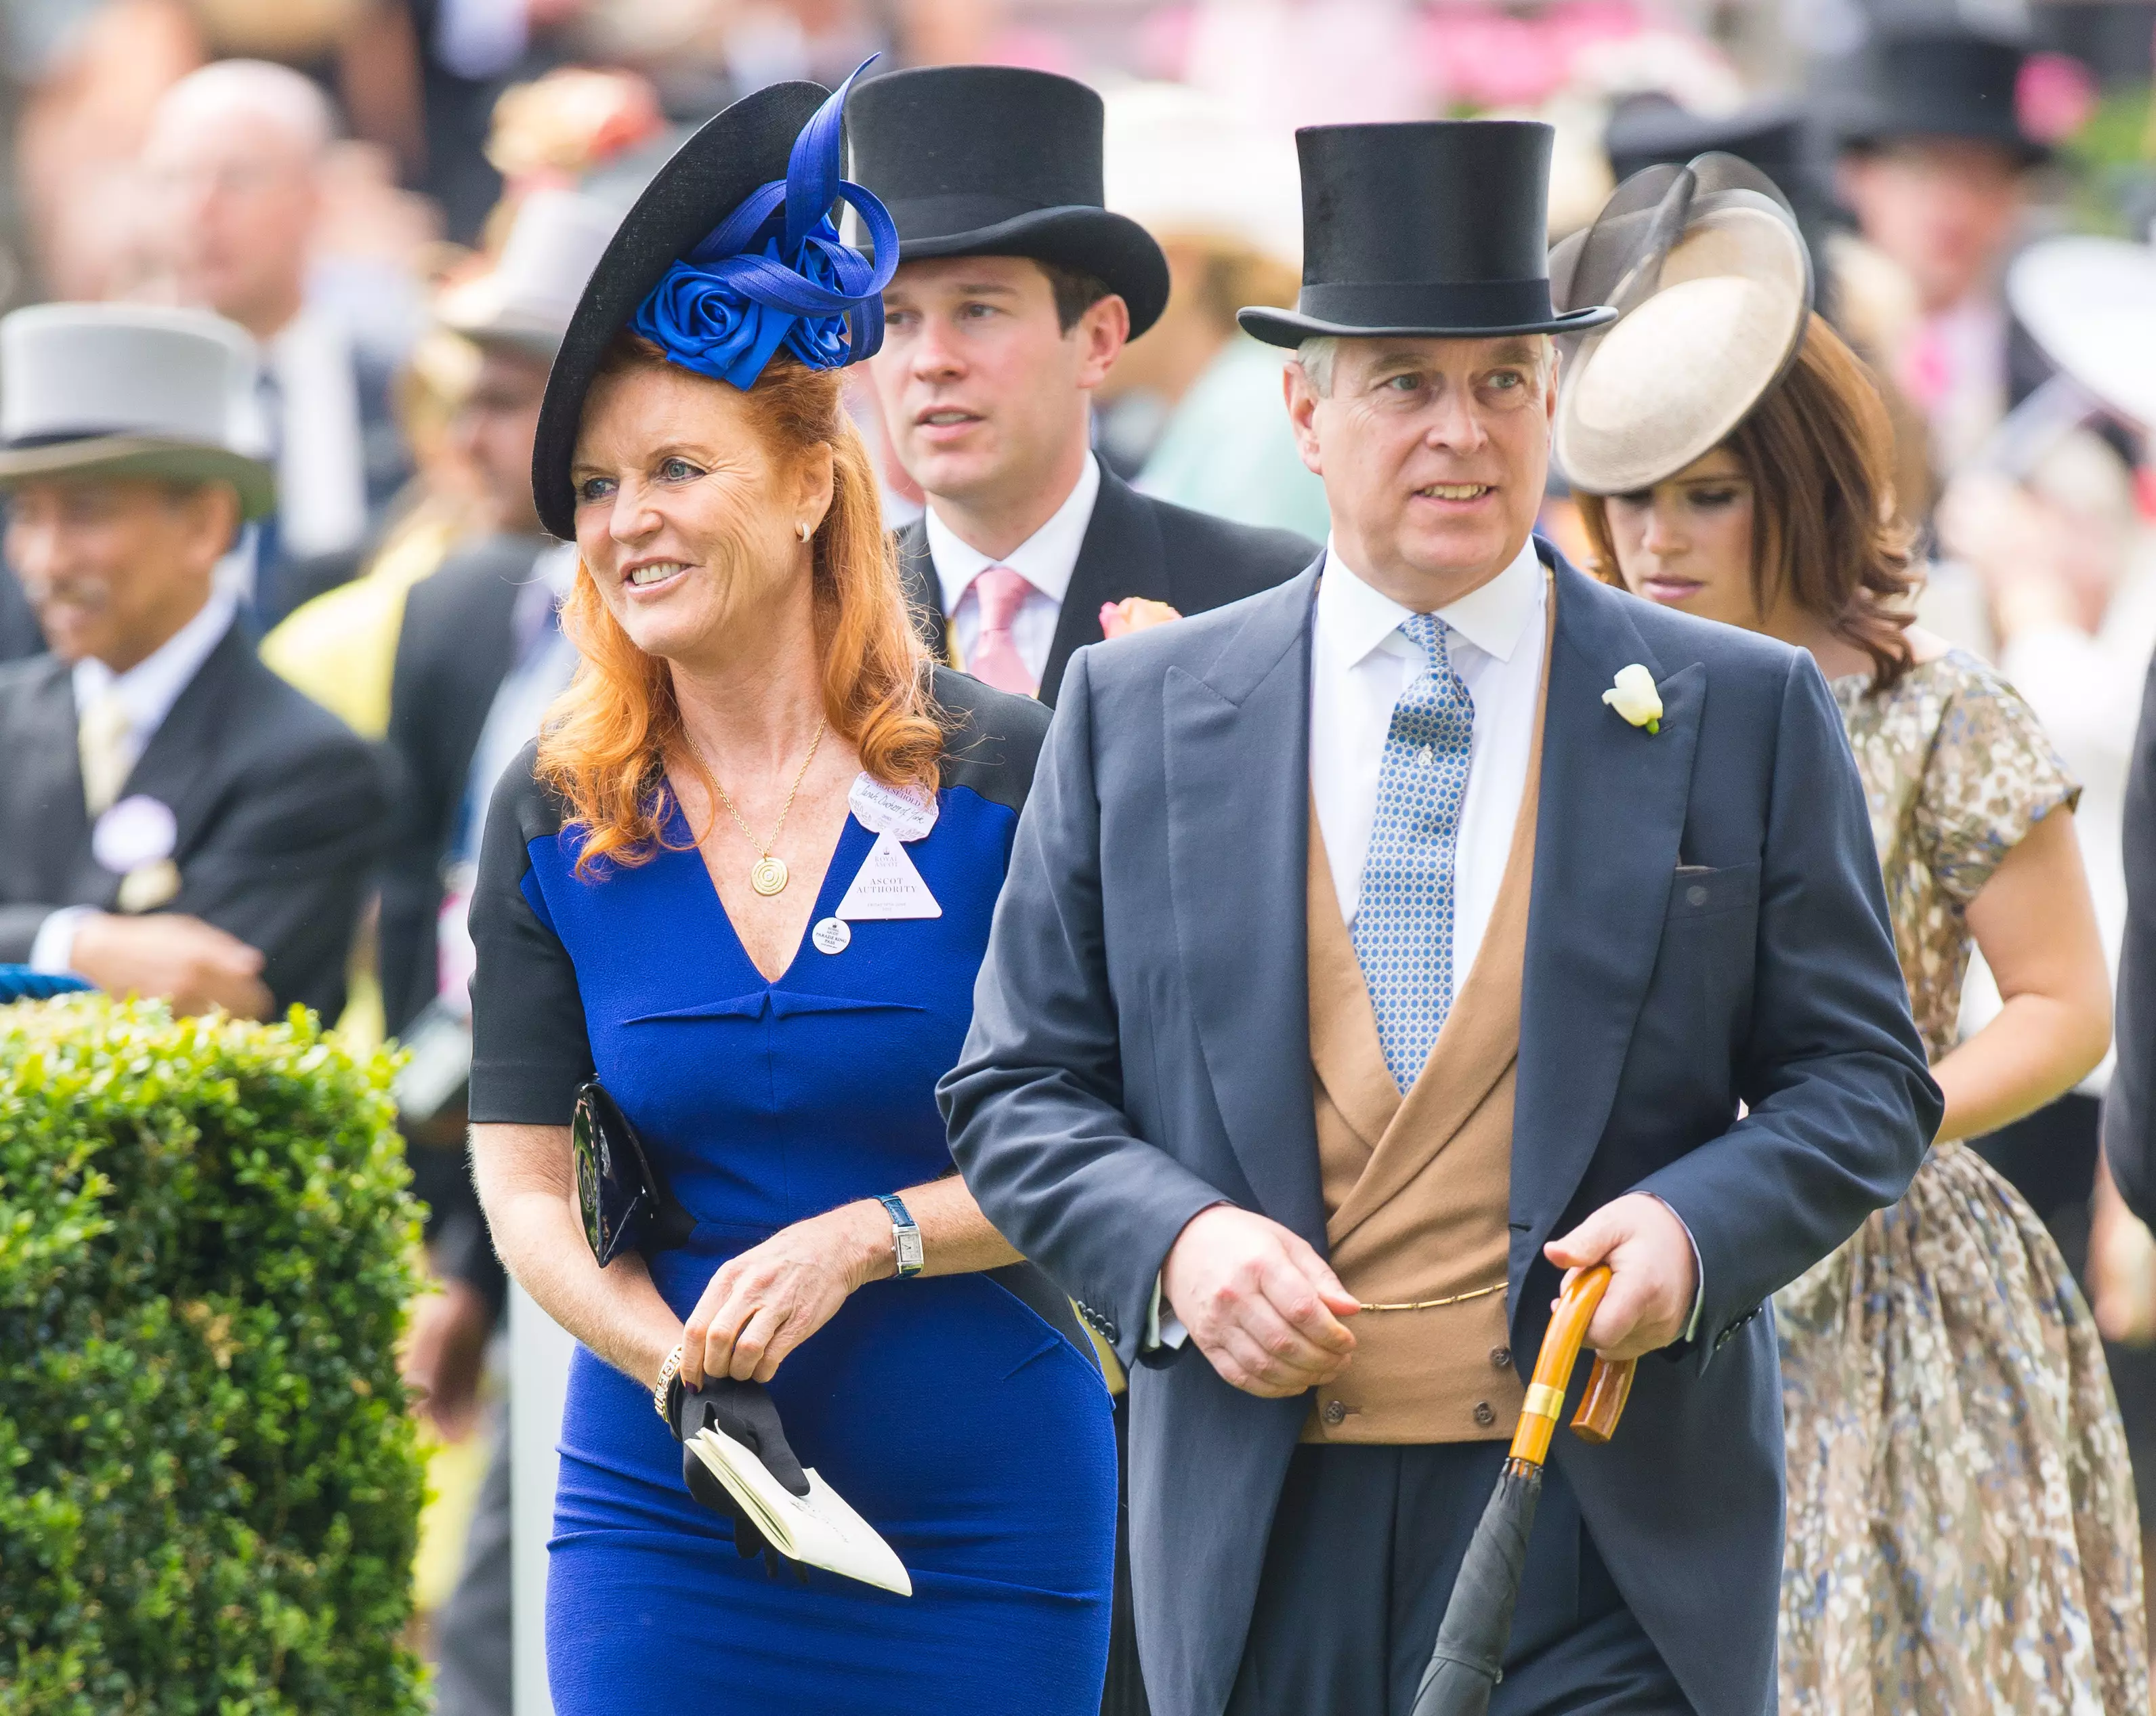 The Duke and Duchess of York are happy parents